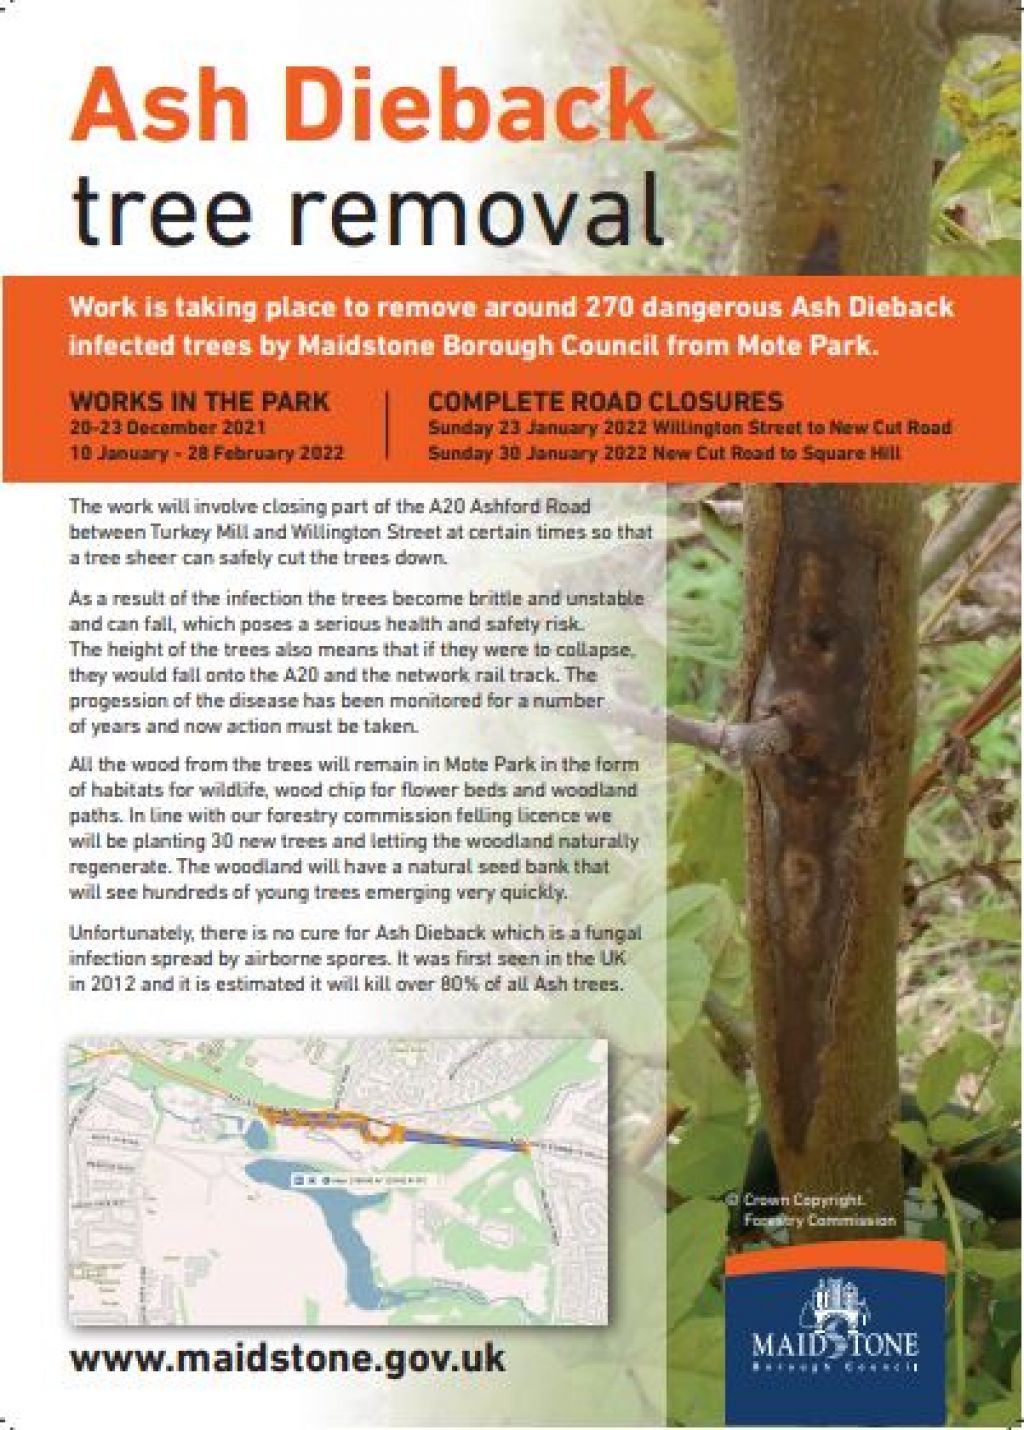 Ash Dieback trees to be removed from Mote Park